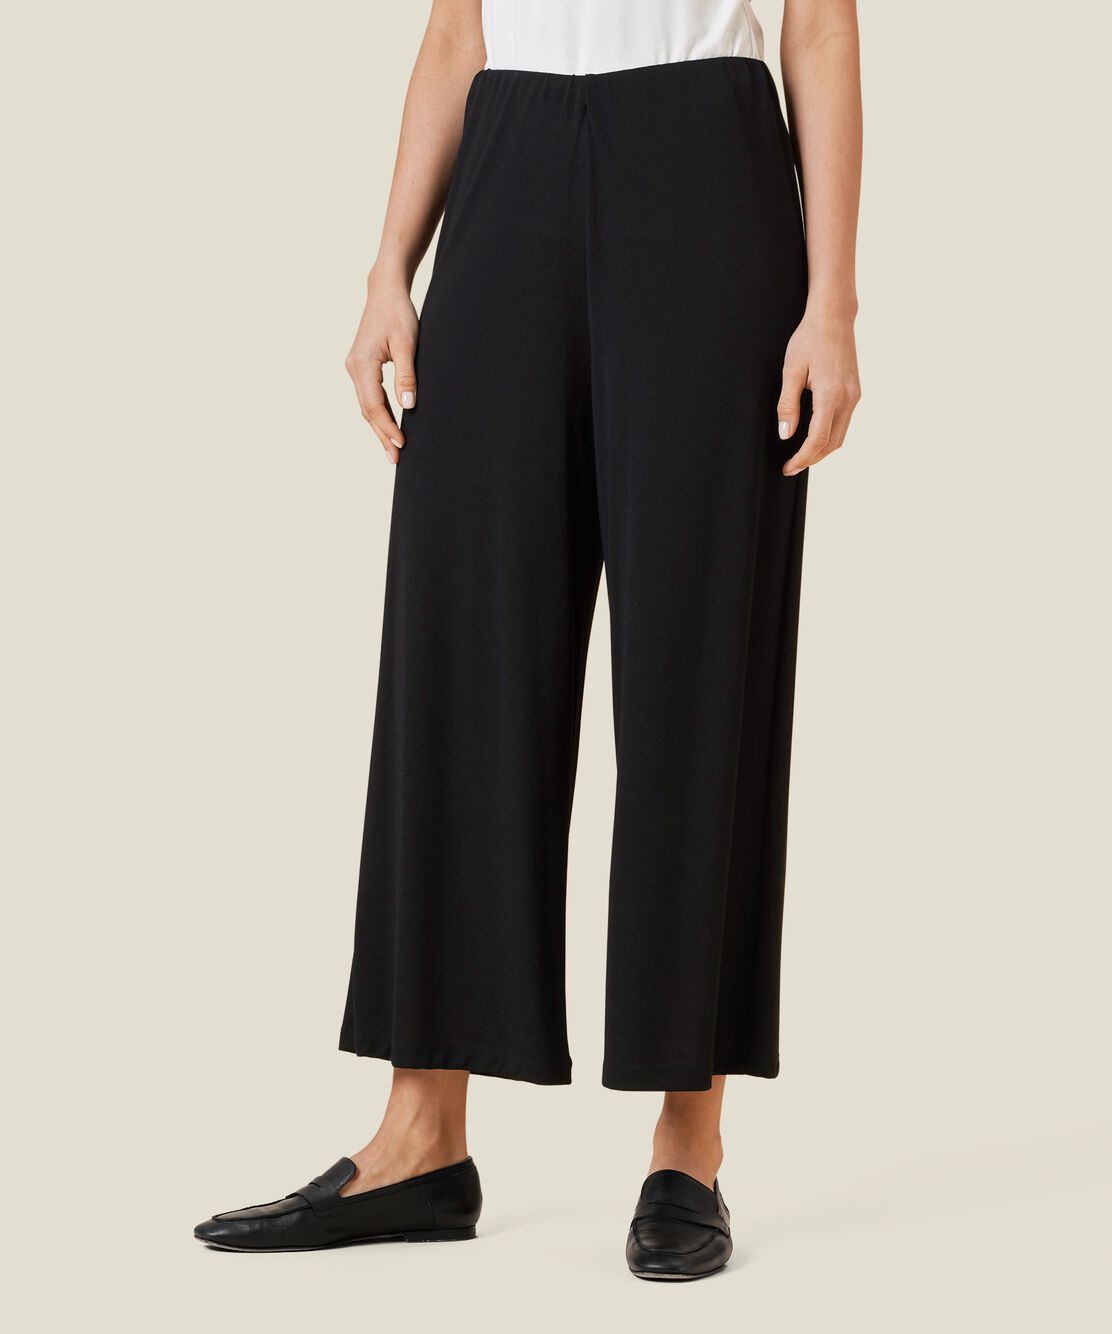 PAM JERSEY TROUSERS, Black, hi-res